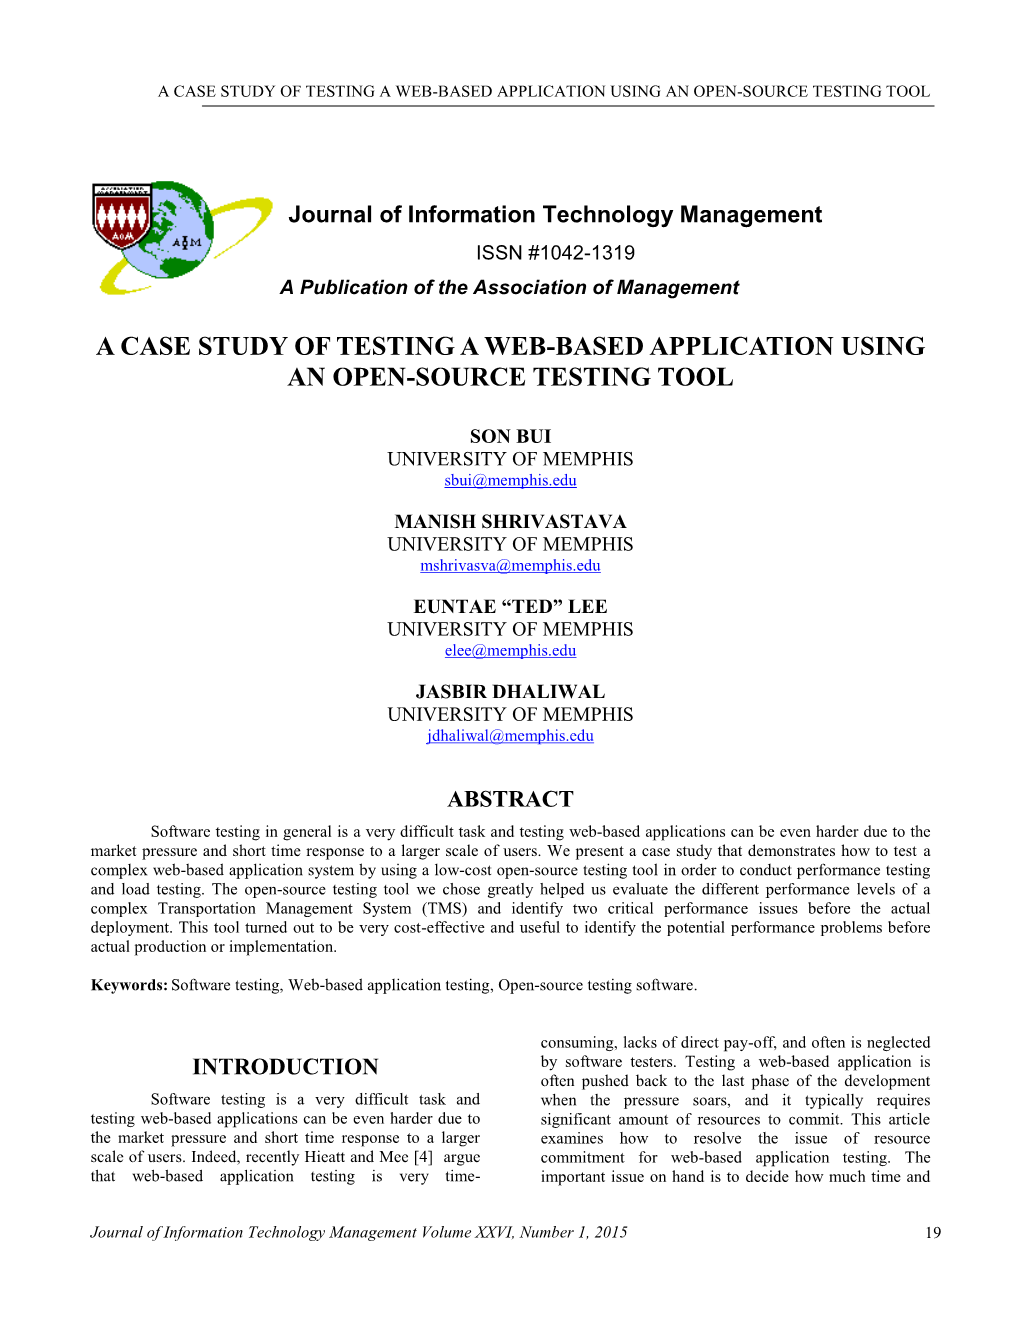 A Case Study of Testing a Web-Based Application Using an Open-Source Testing Tool